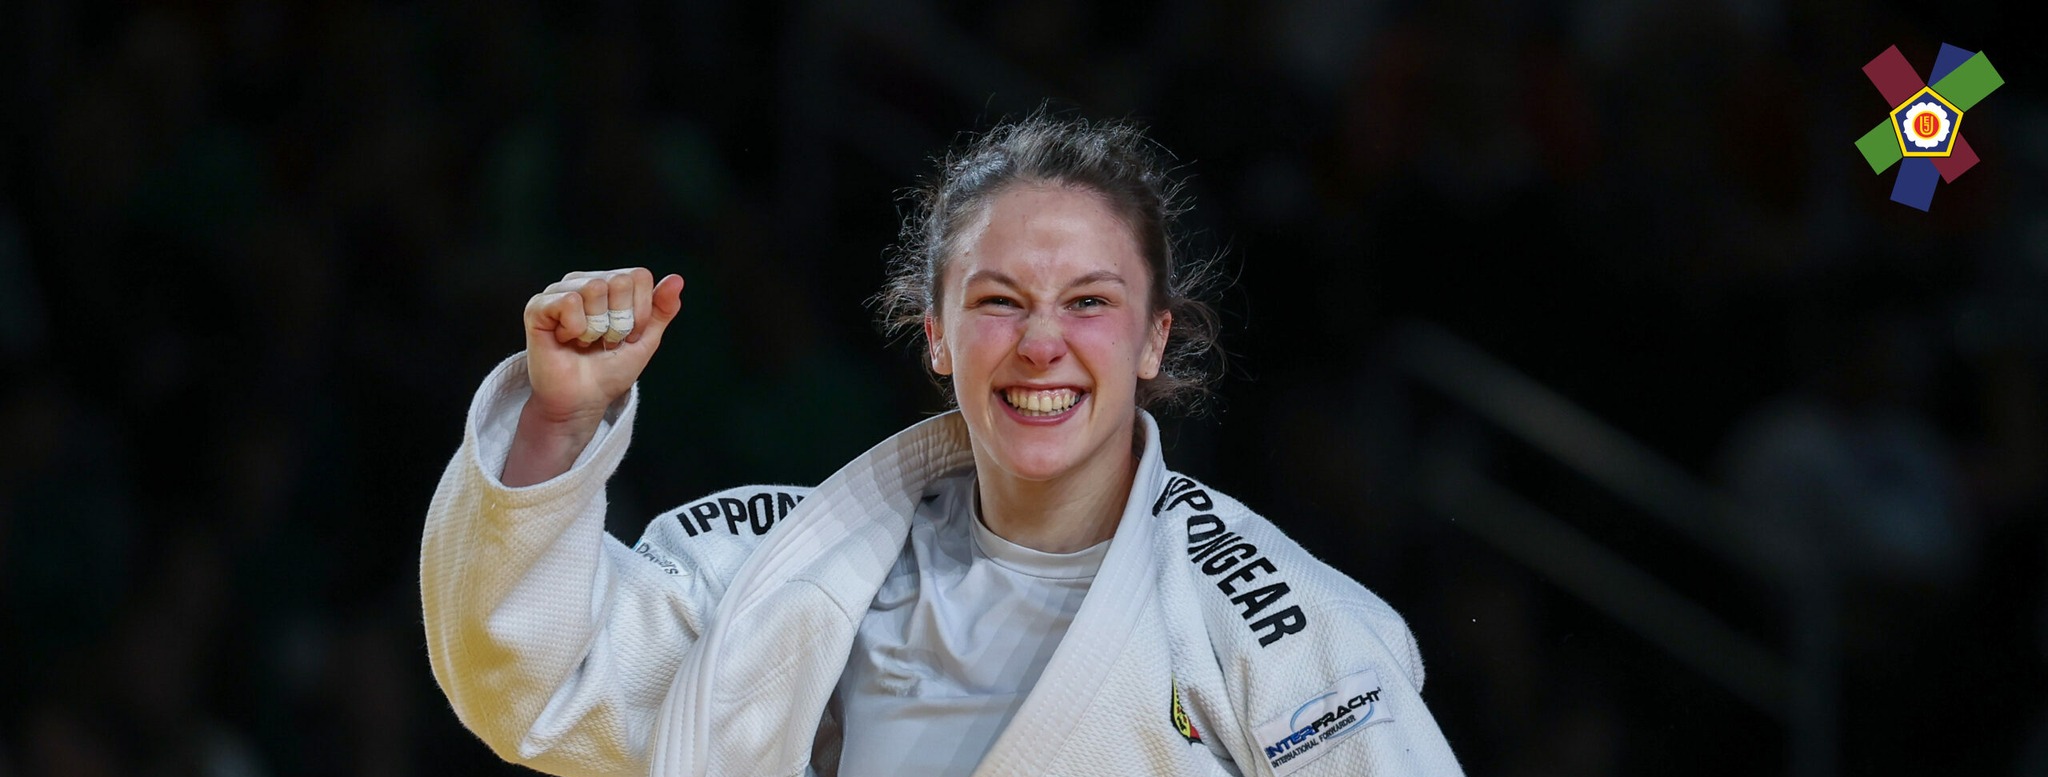 We supported the new European judo champion